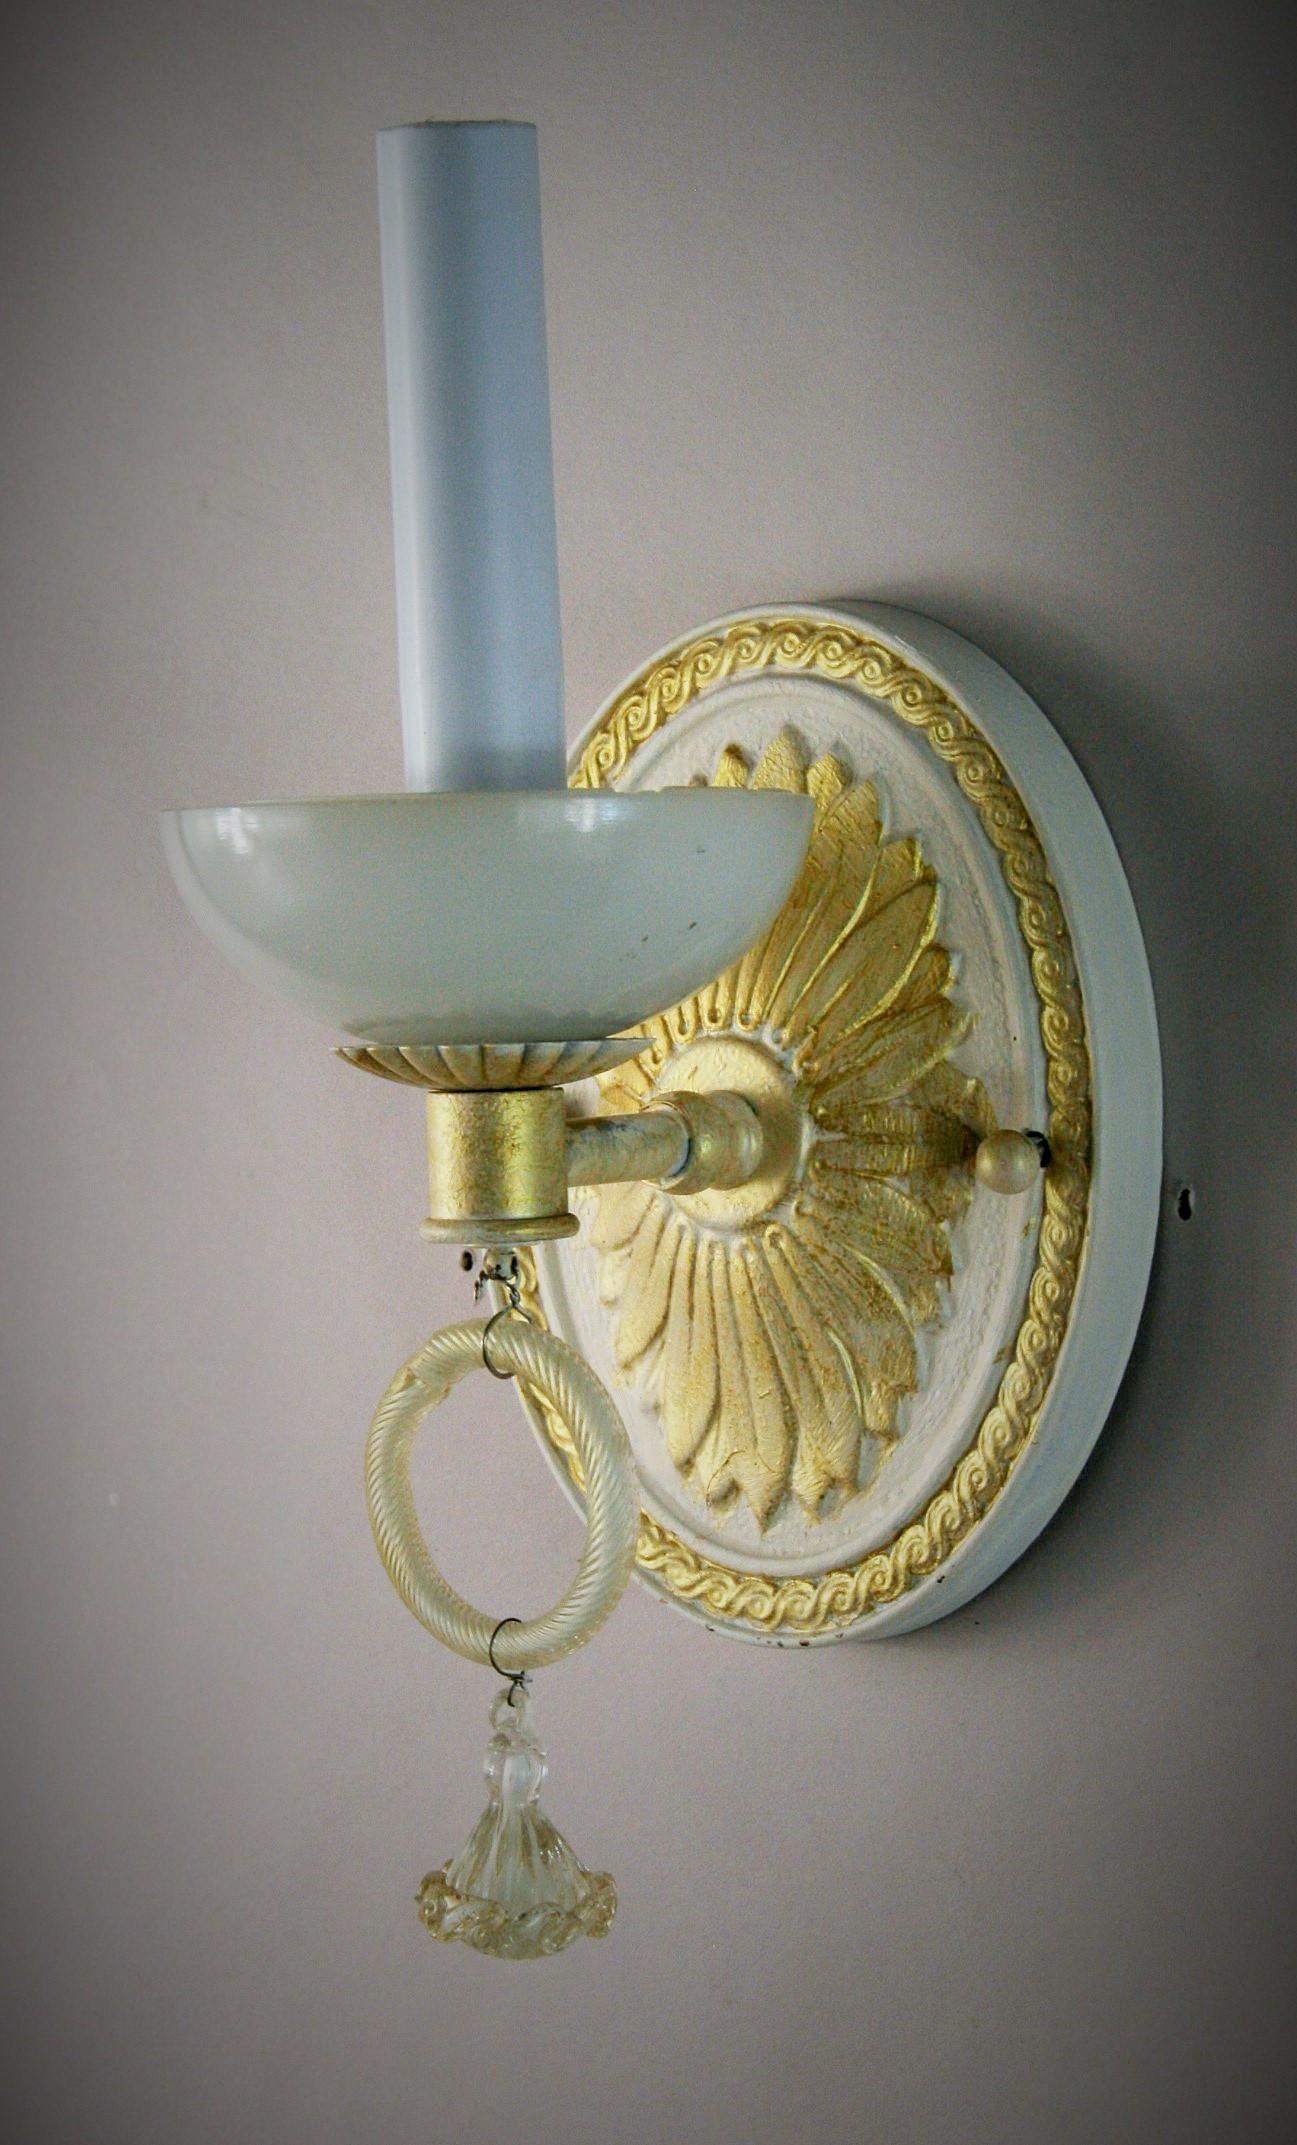 8-134 pair of Italian sconces painted white with gold details.
Made with Murano handmade glass and brass
Rewired.